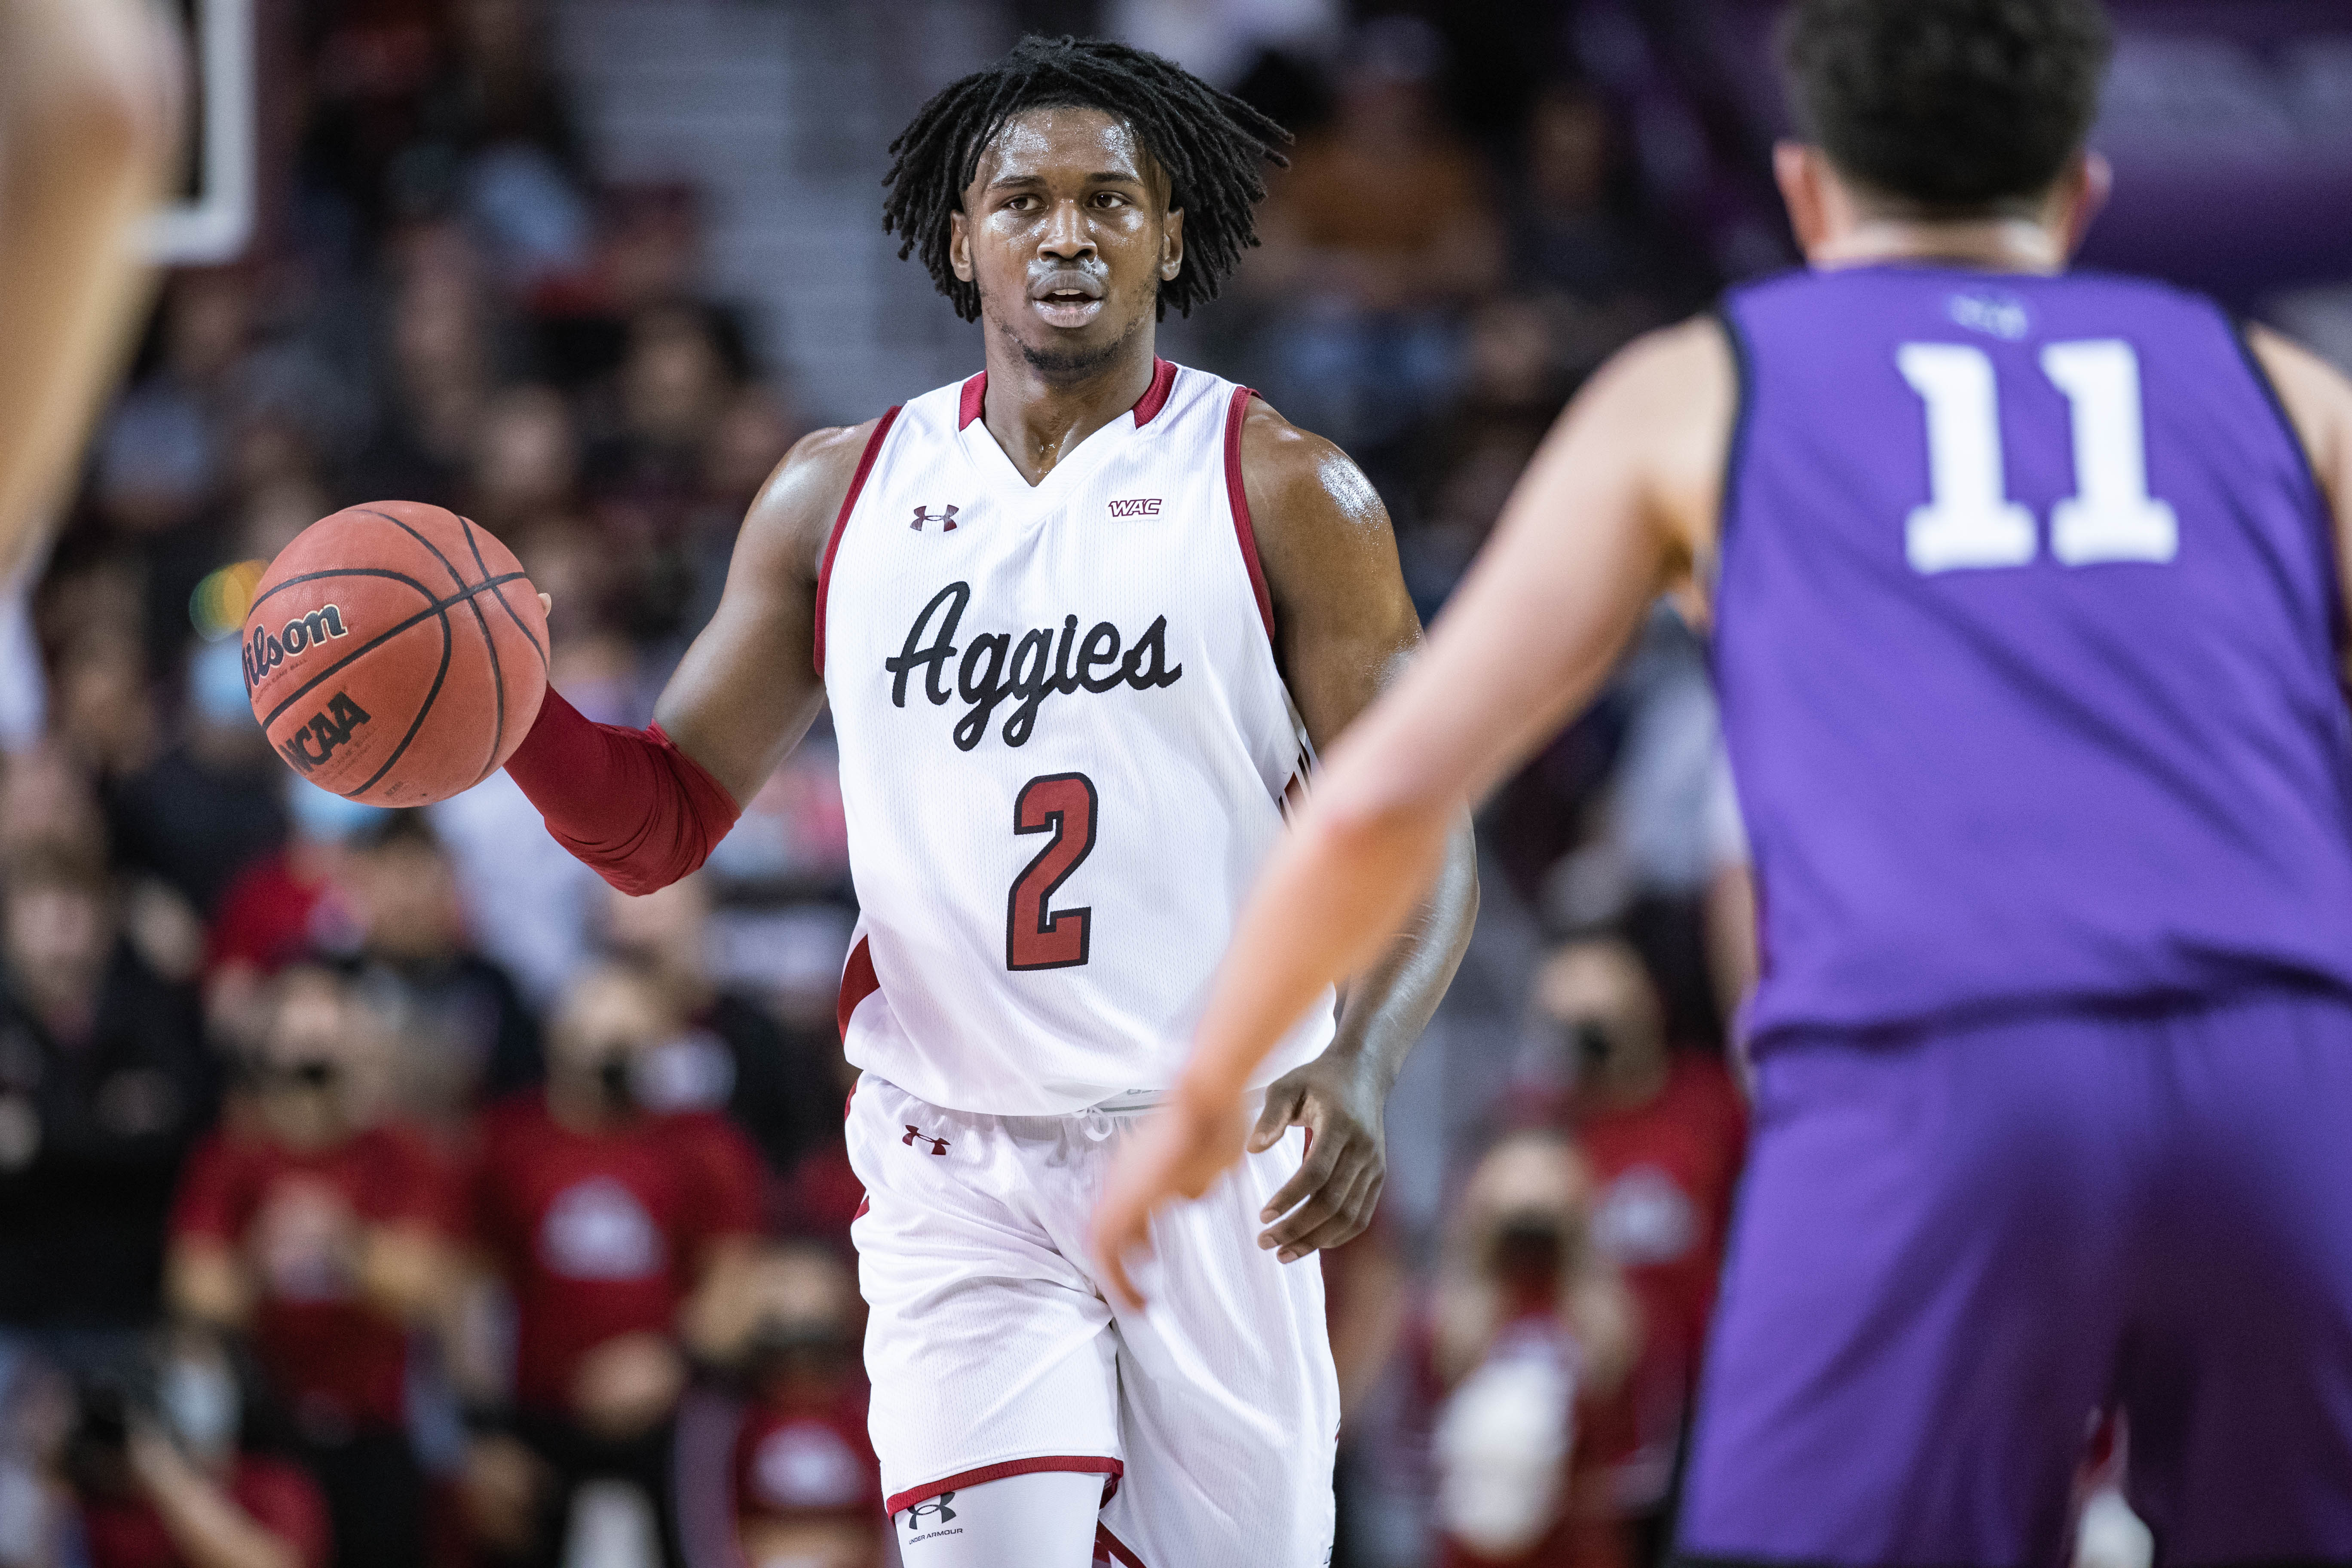 Donnie Tillman works up court as the New Mexico State Aggies face off against the Abilene Christian Wildcats at the Pas American in Las Cruces on Saturday, Jan. 15, 2022.&nbsp;